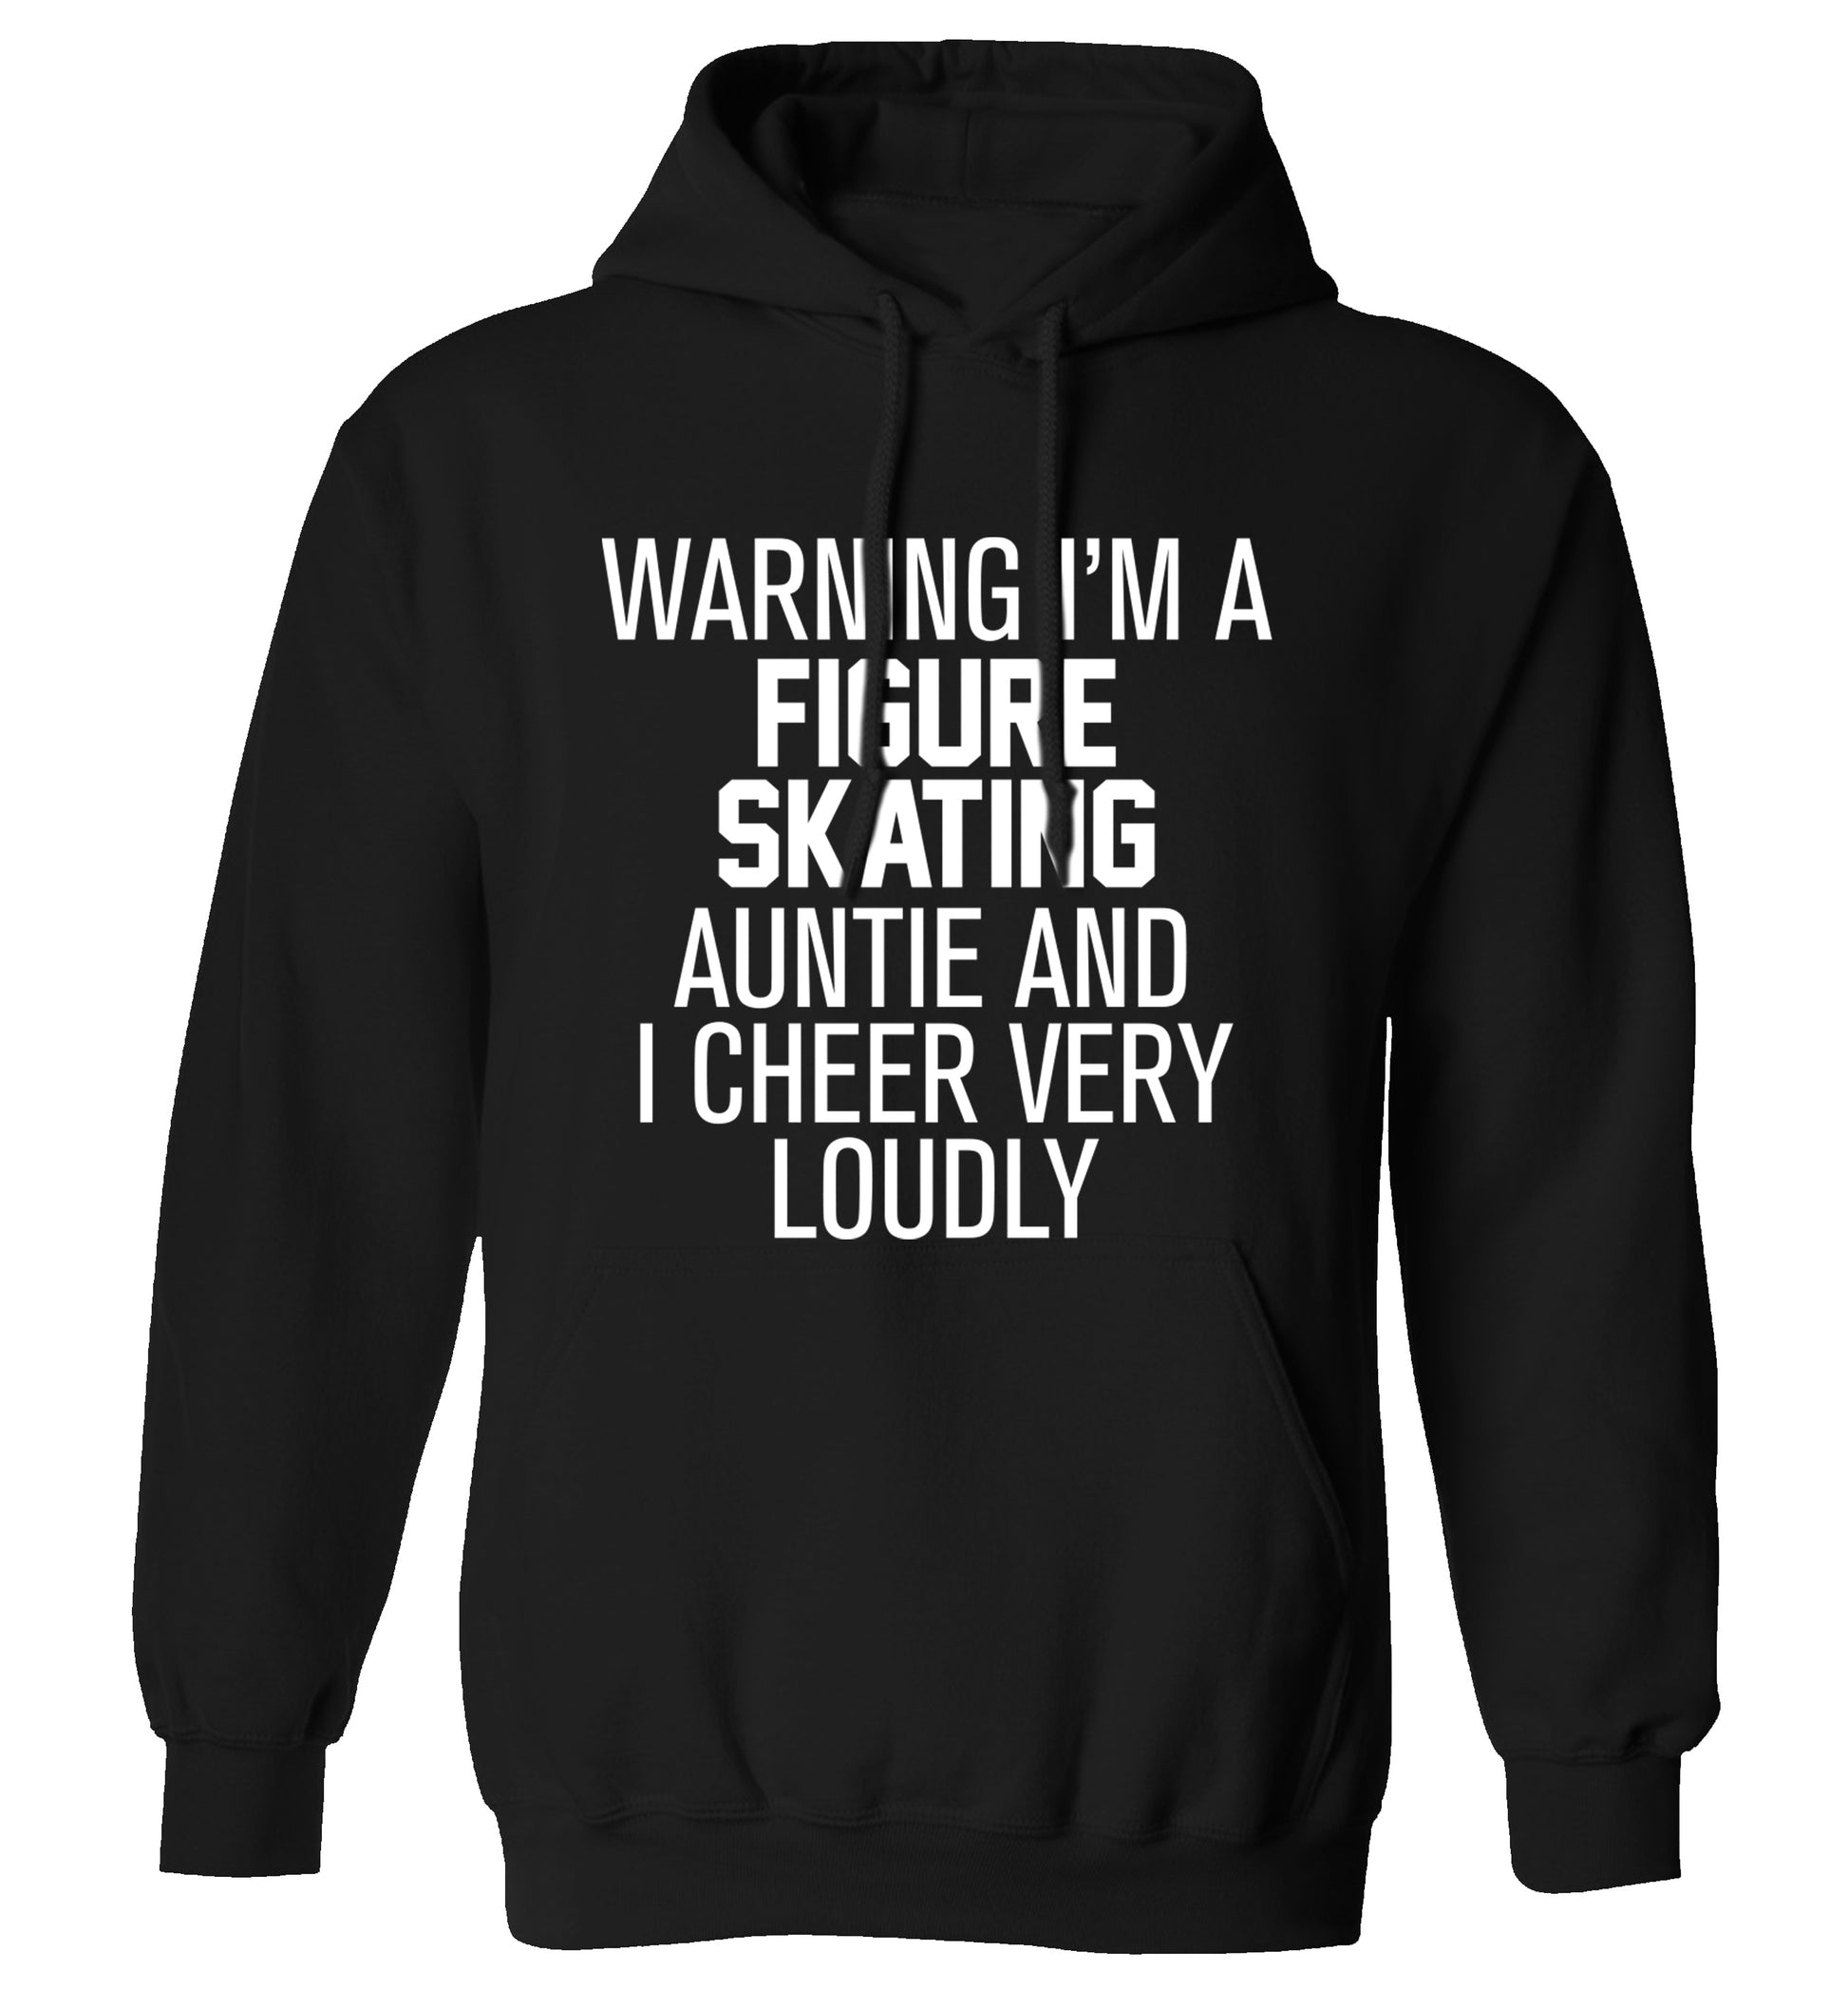 Warning I'm a figure skating auntie and I cheer very loudly adults unisexblack hoodie 2XL